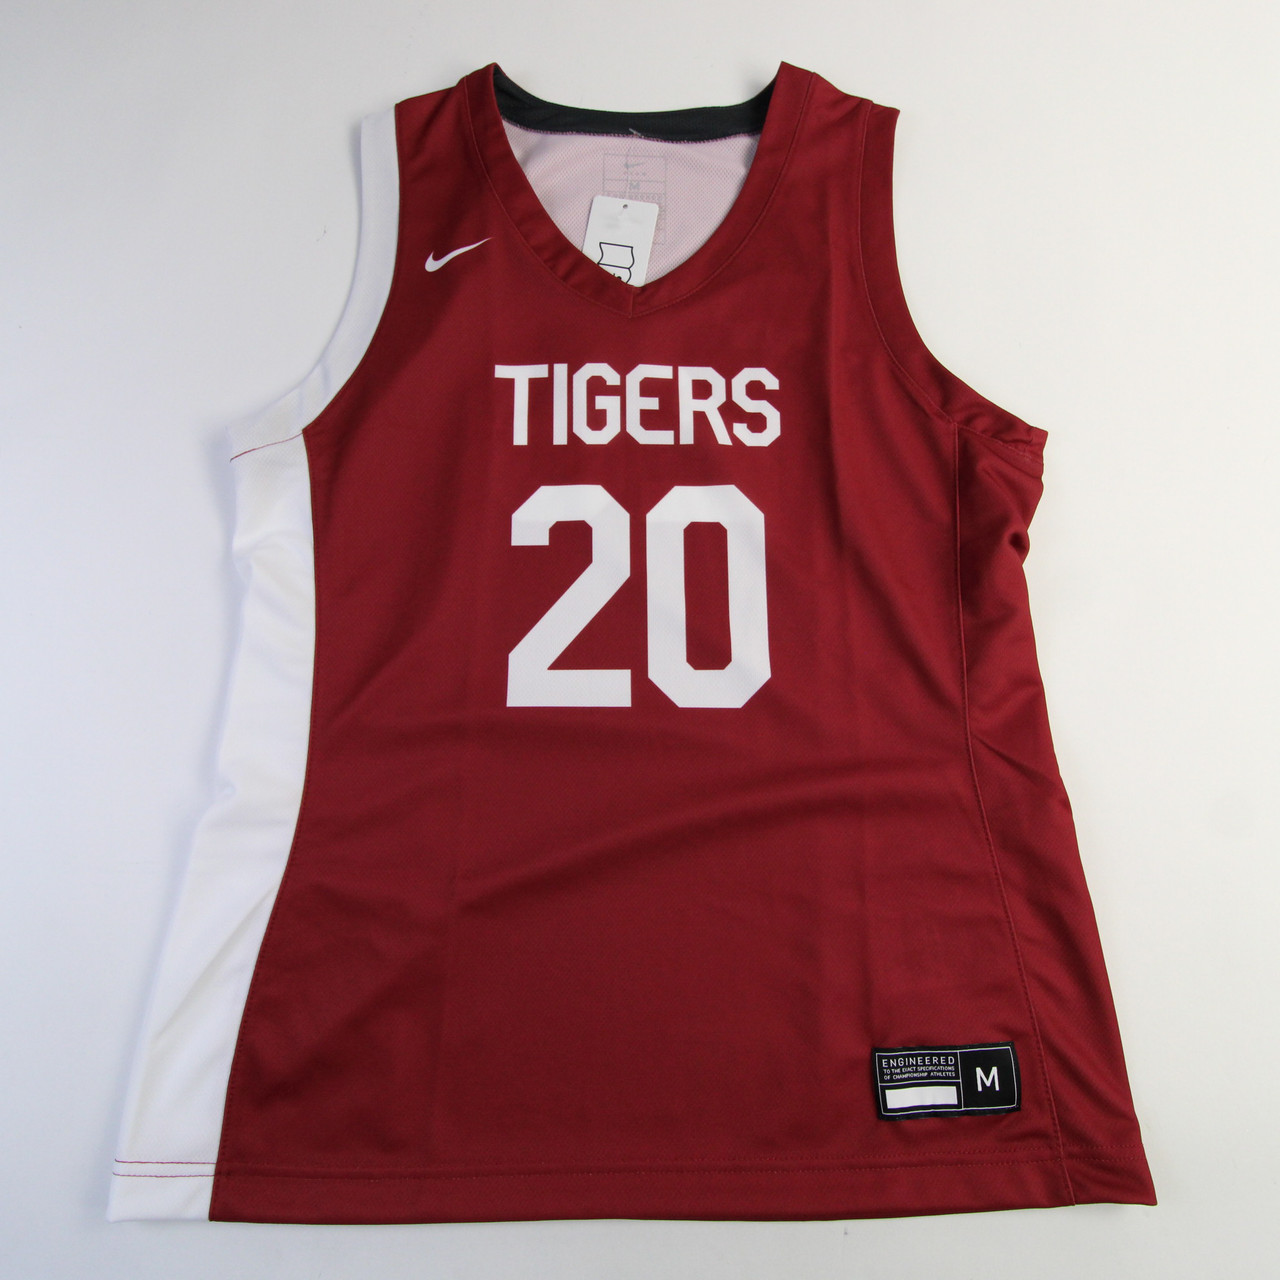 Nike Team Practice Jersey - Basketball Women's Crimson New with